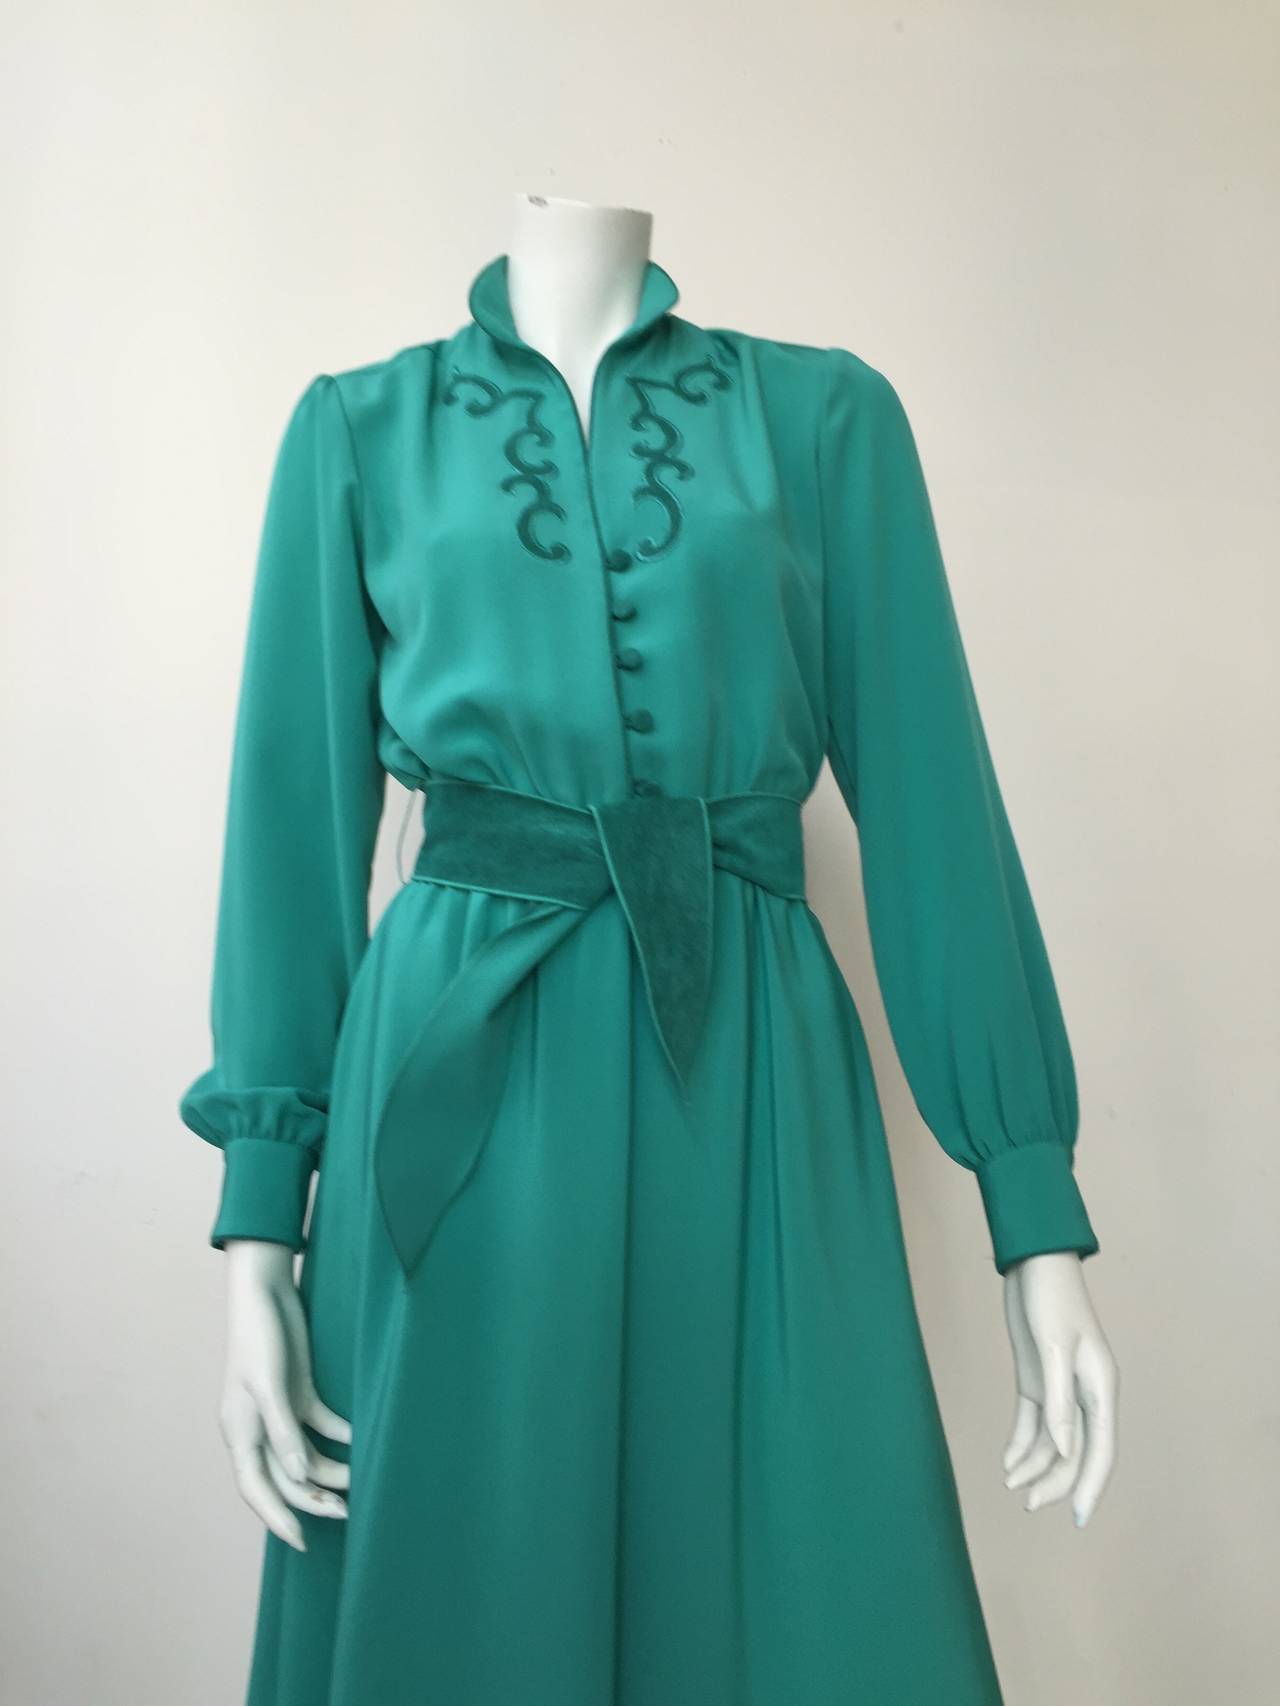 Lilli Ann 80s green dress with ultra suede trim, buttons & belt. 
Elastic waist. 
Made in the USA.  
Size 4 but please use the measurements I will provide you to make sure this item will fit you to perfection. This dress  has